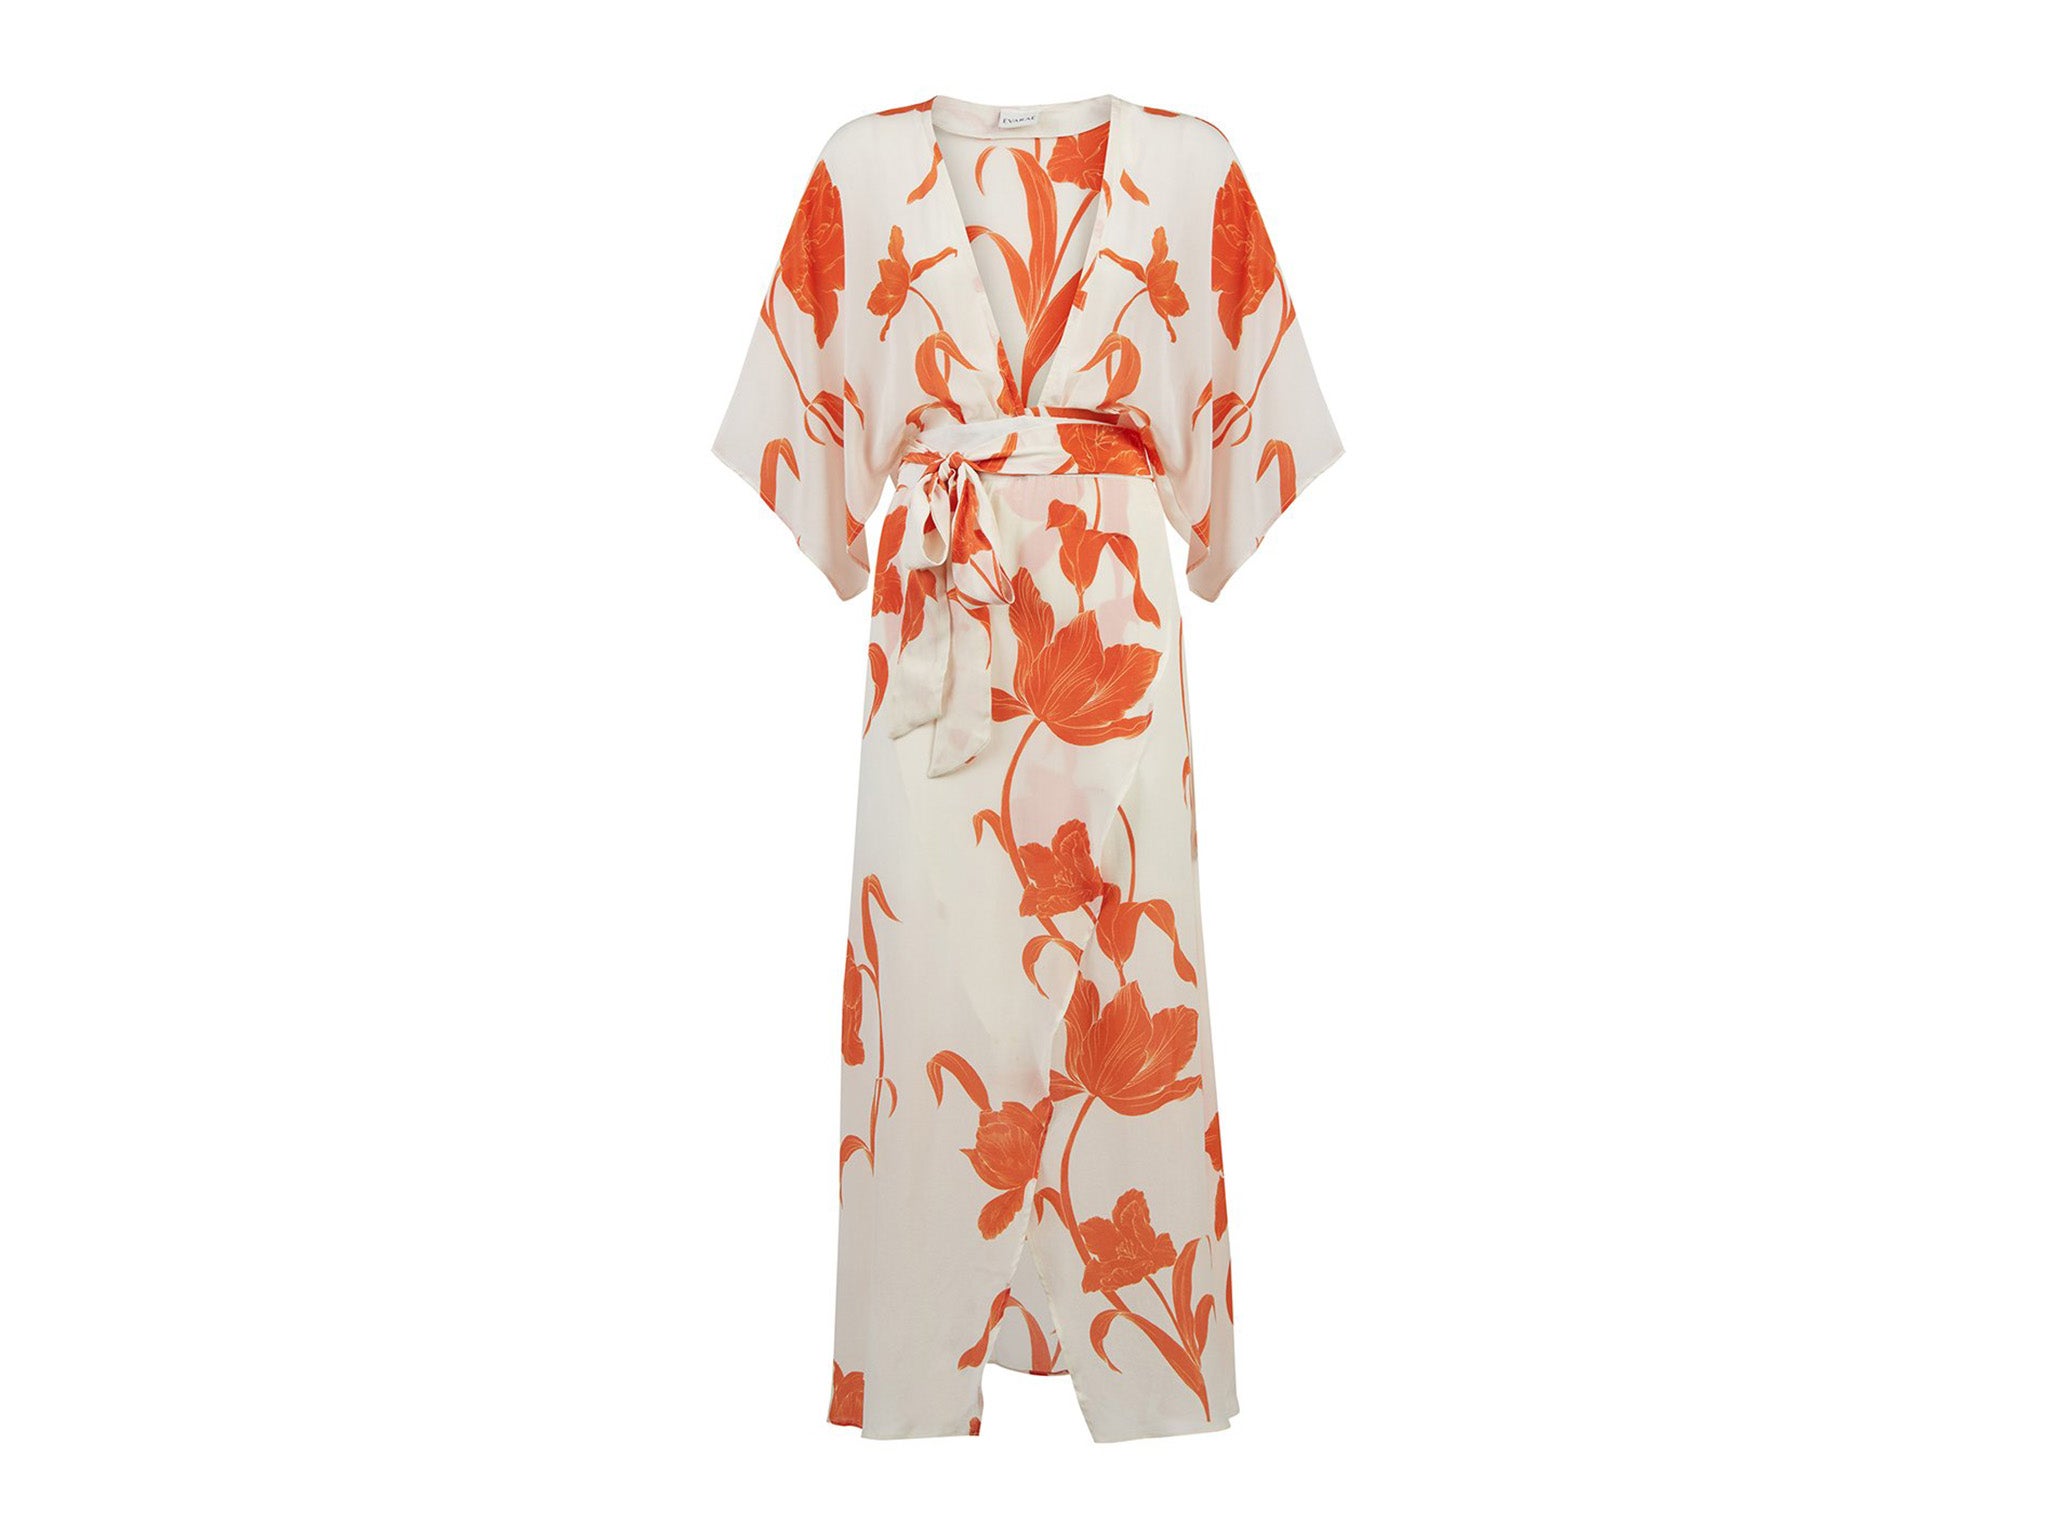 If you're celebrating an occasion by staying somewhere luxurious, snap this silk beach robe up